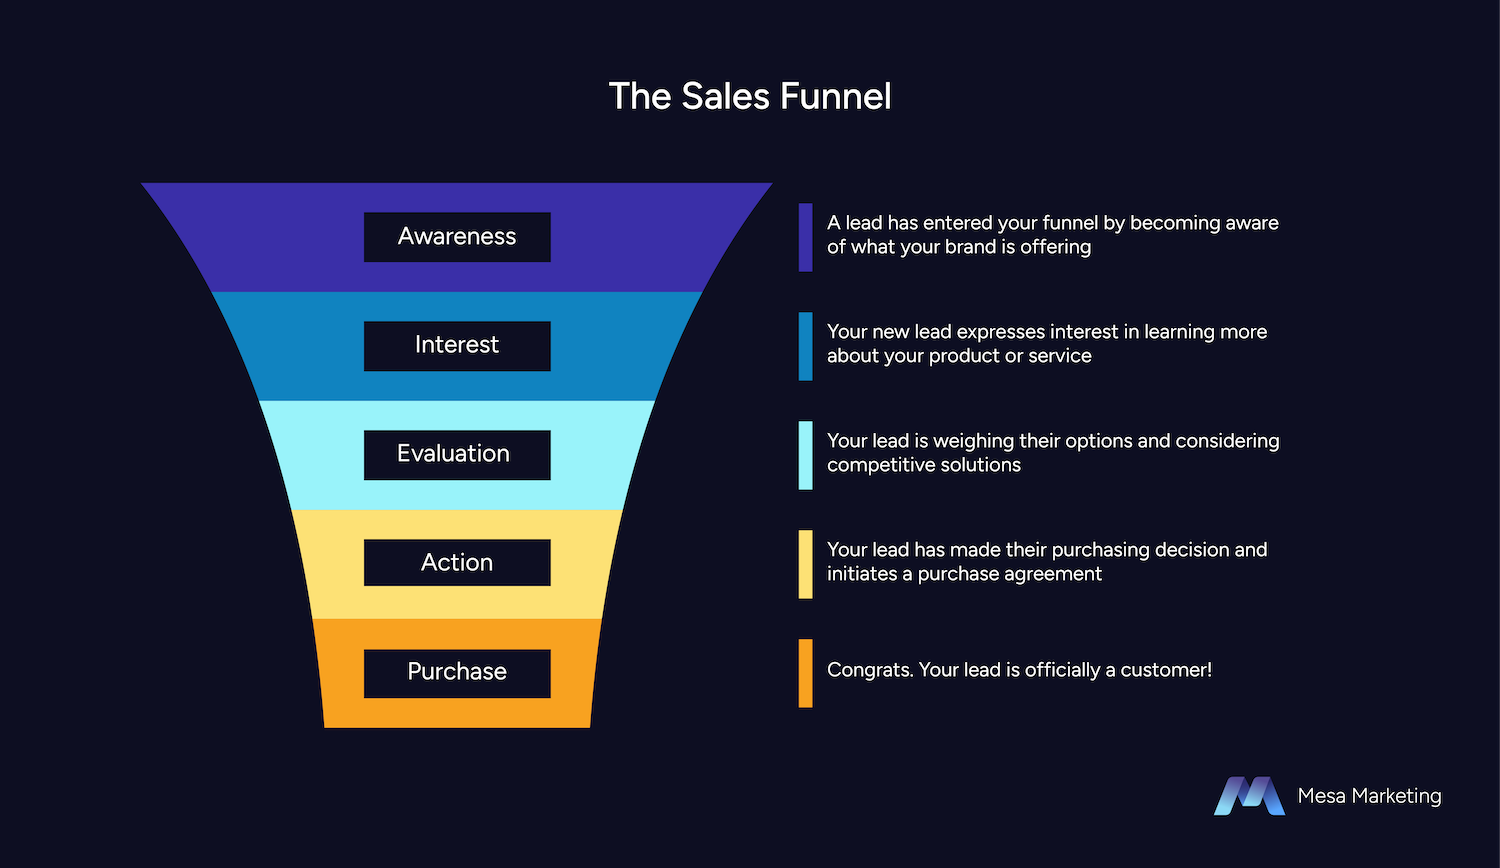 Stages of the Sales Funnel